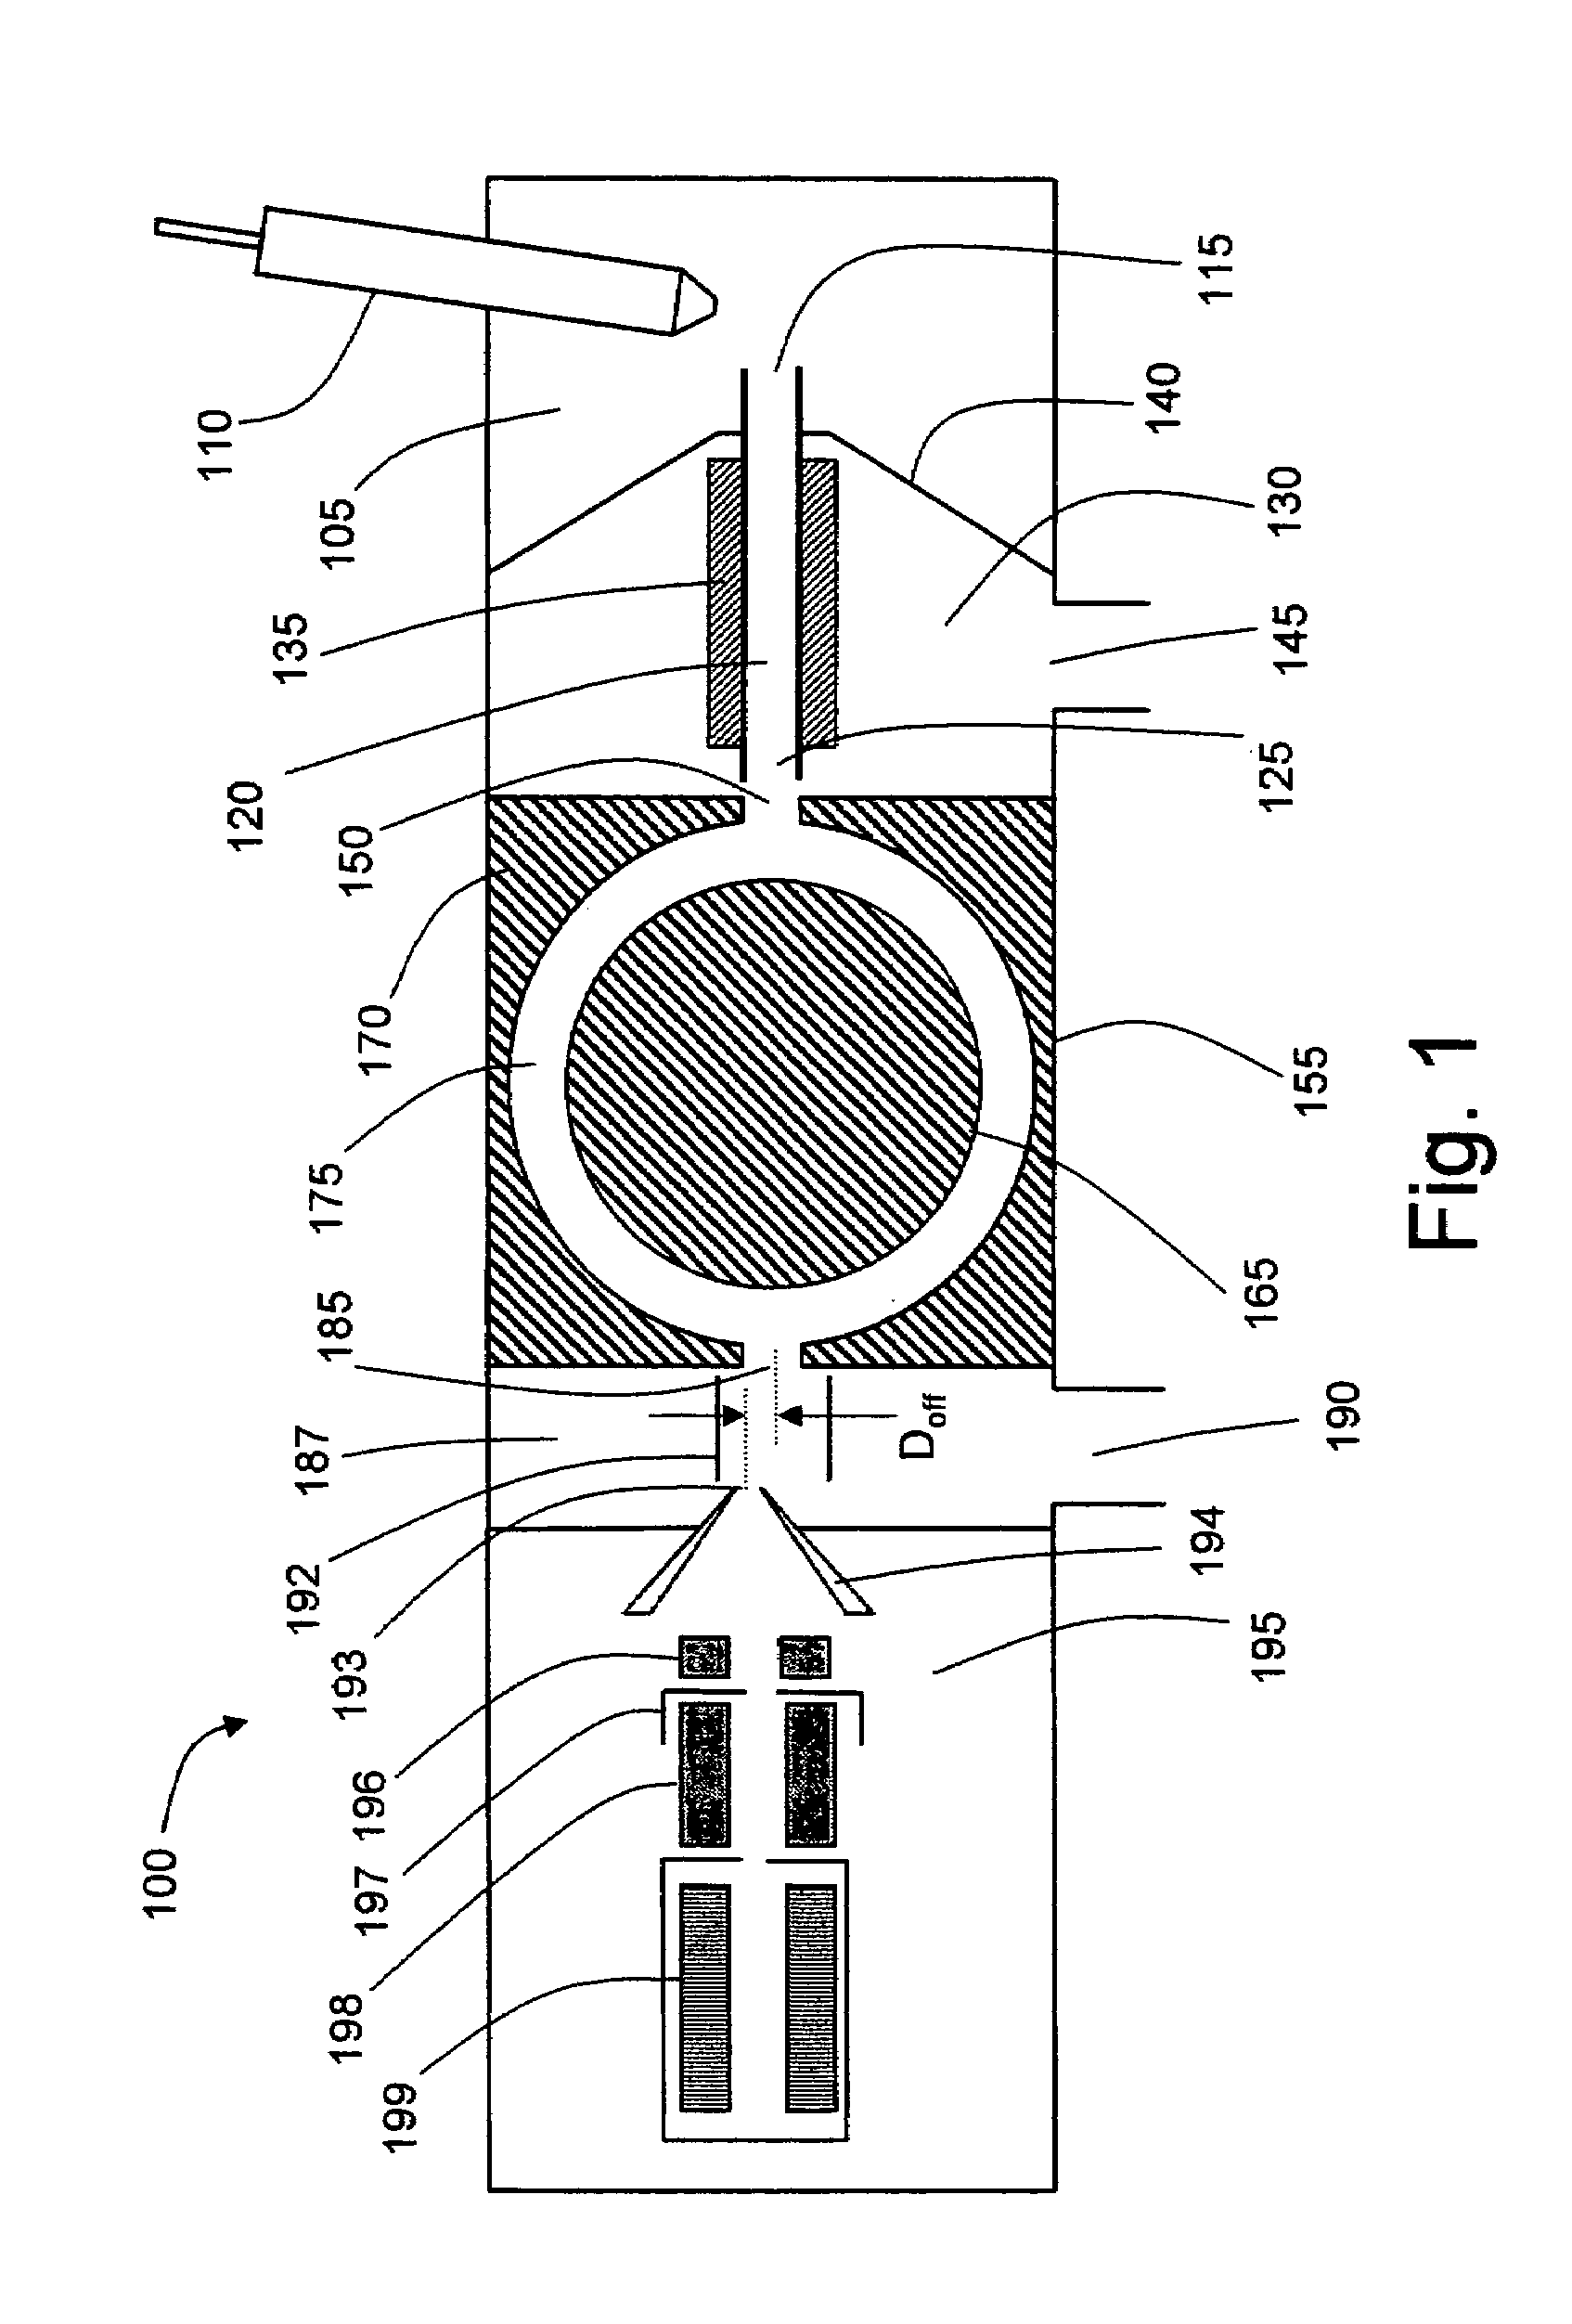 Enhanced ion desolvation for an ion mobility spectrometry device